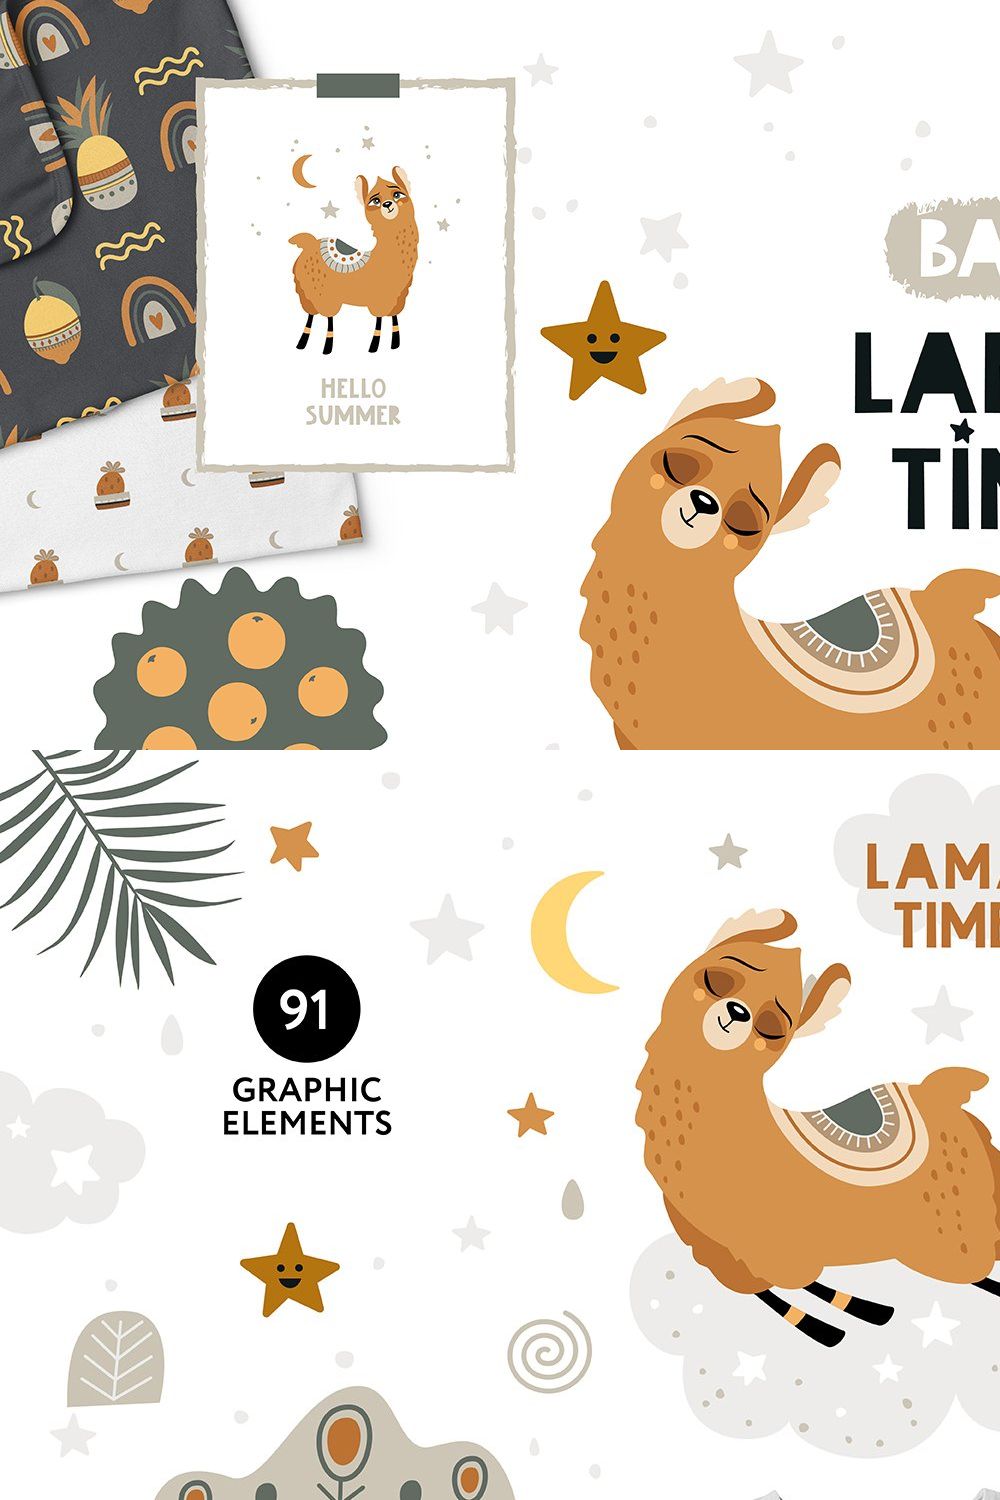 Lama time! pinterest preview image.